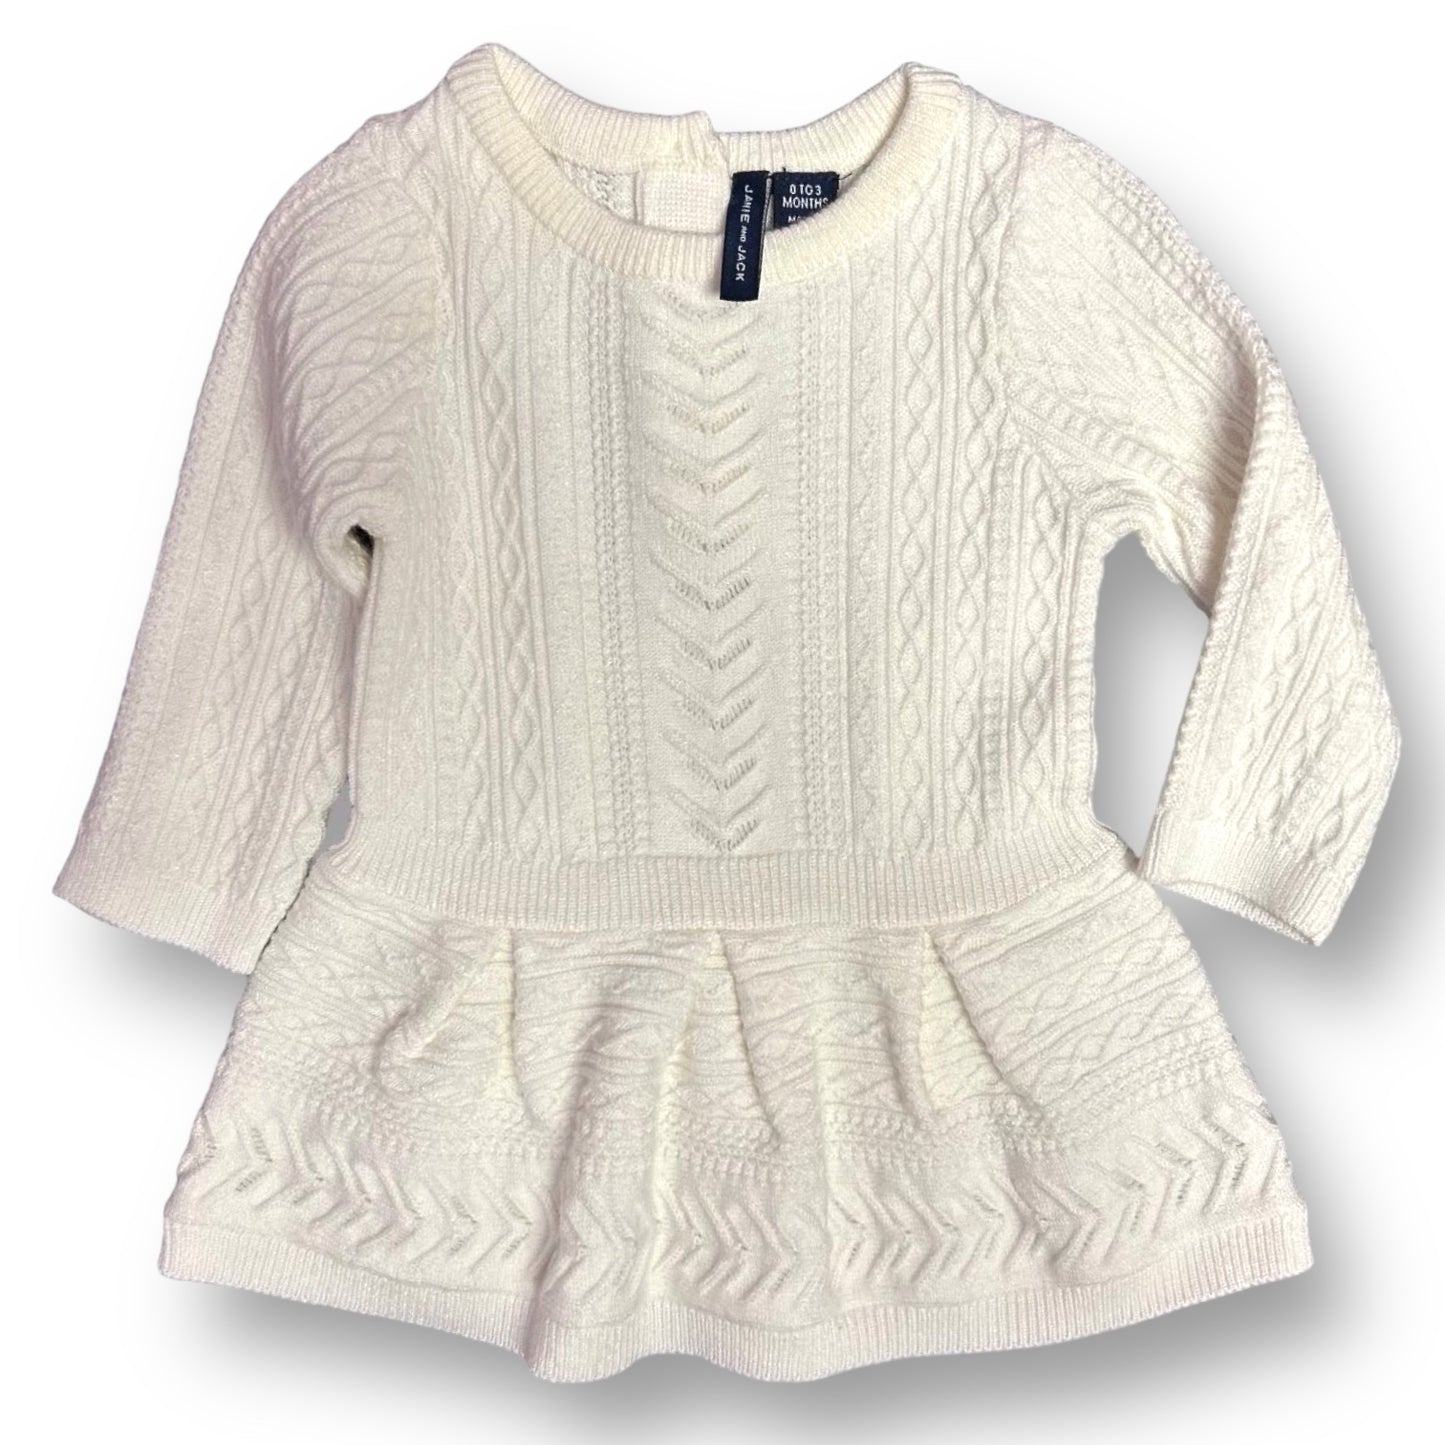 Girls Janie and Jack Size 0-3 Months White Long Sleeve Sweater Dress